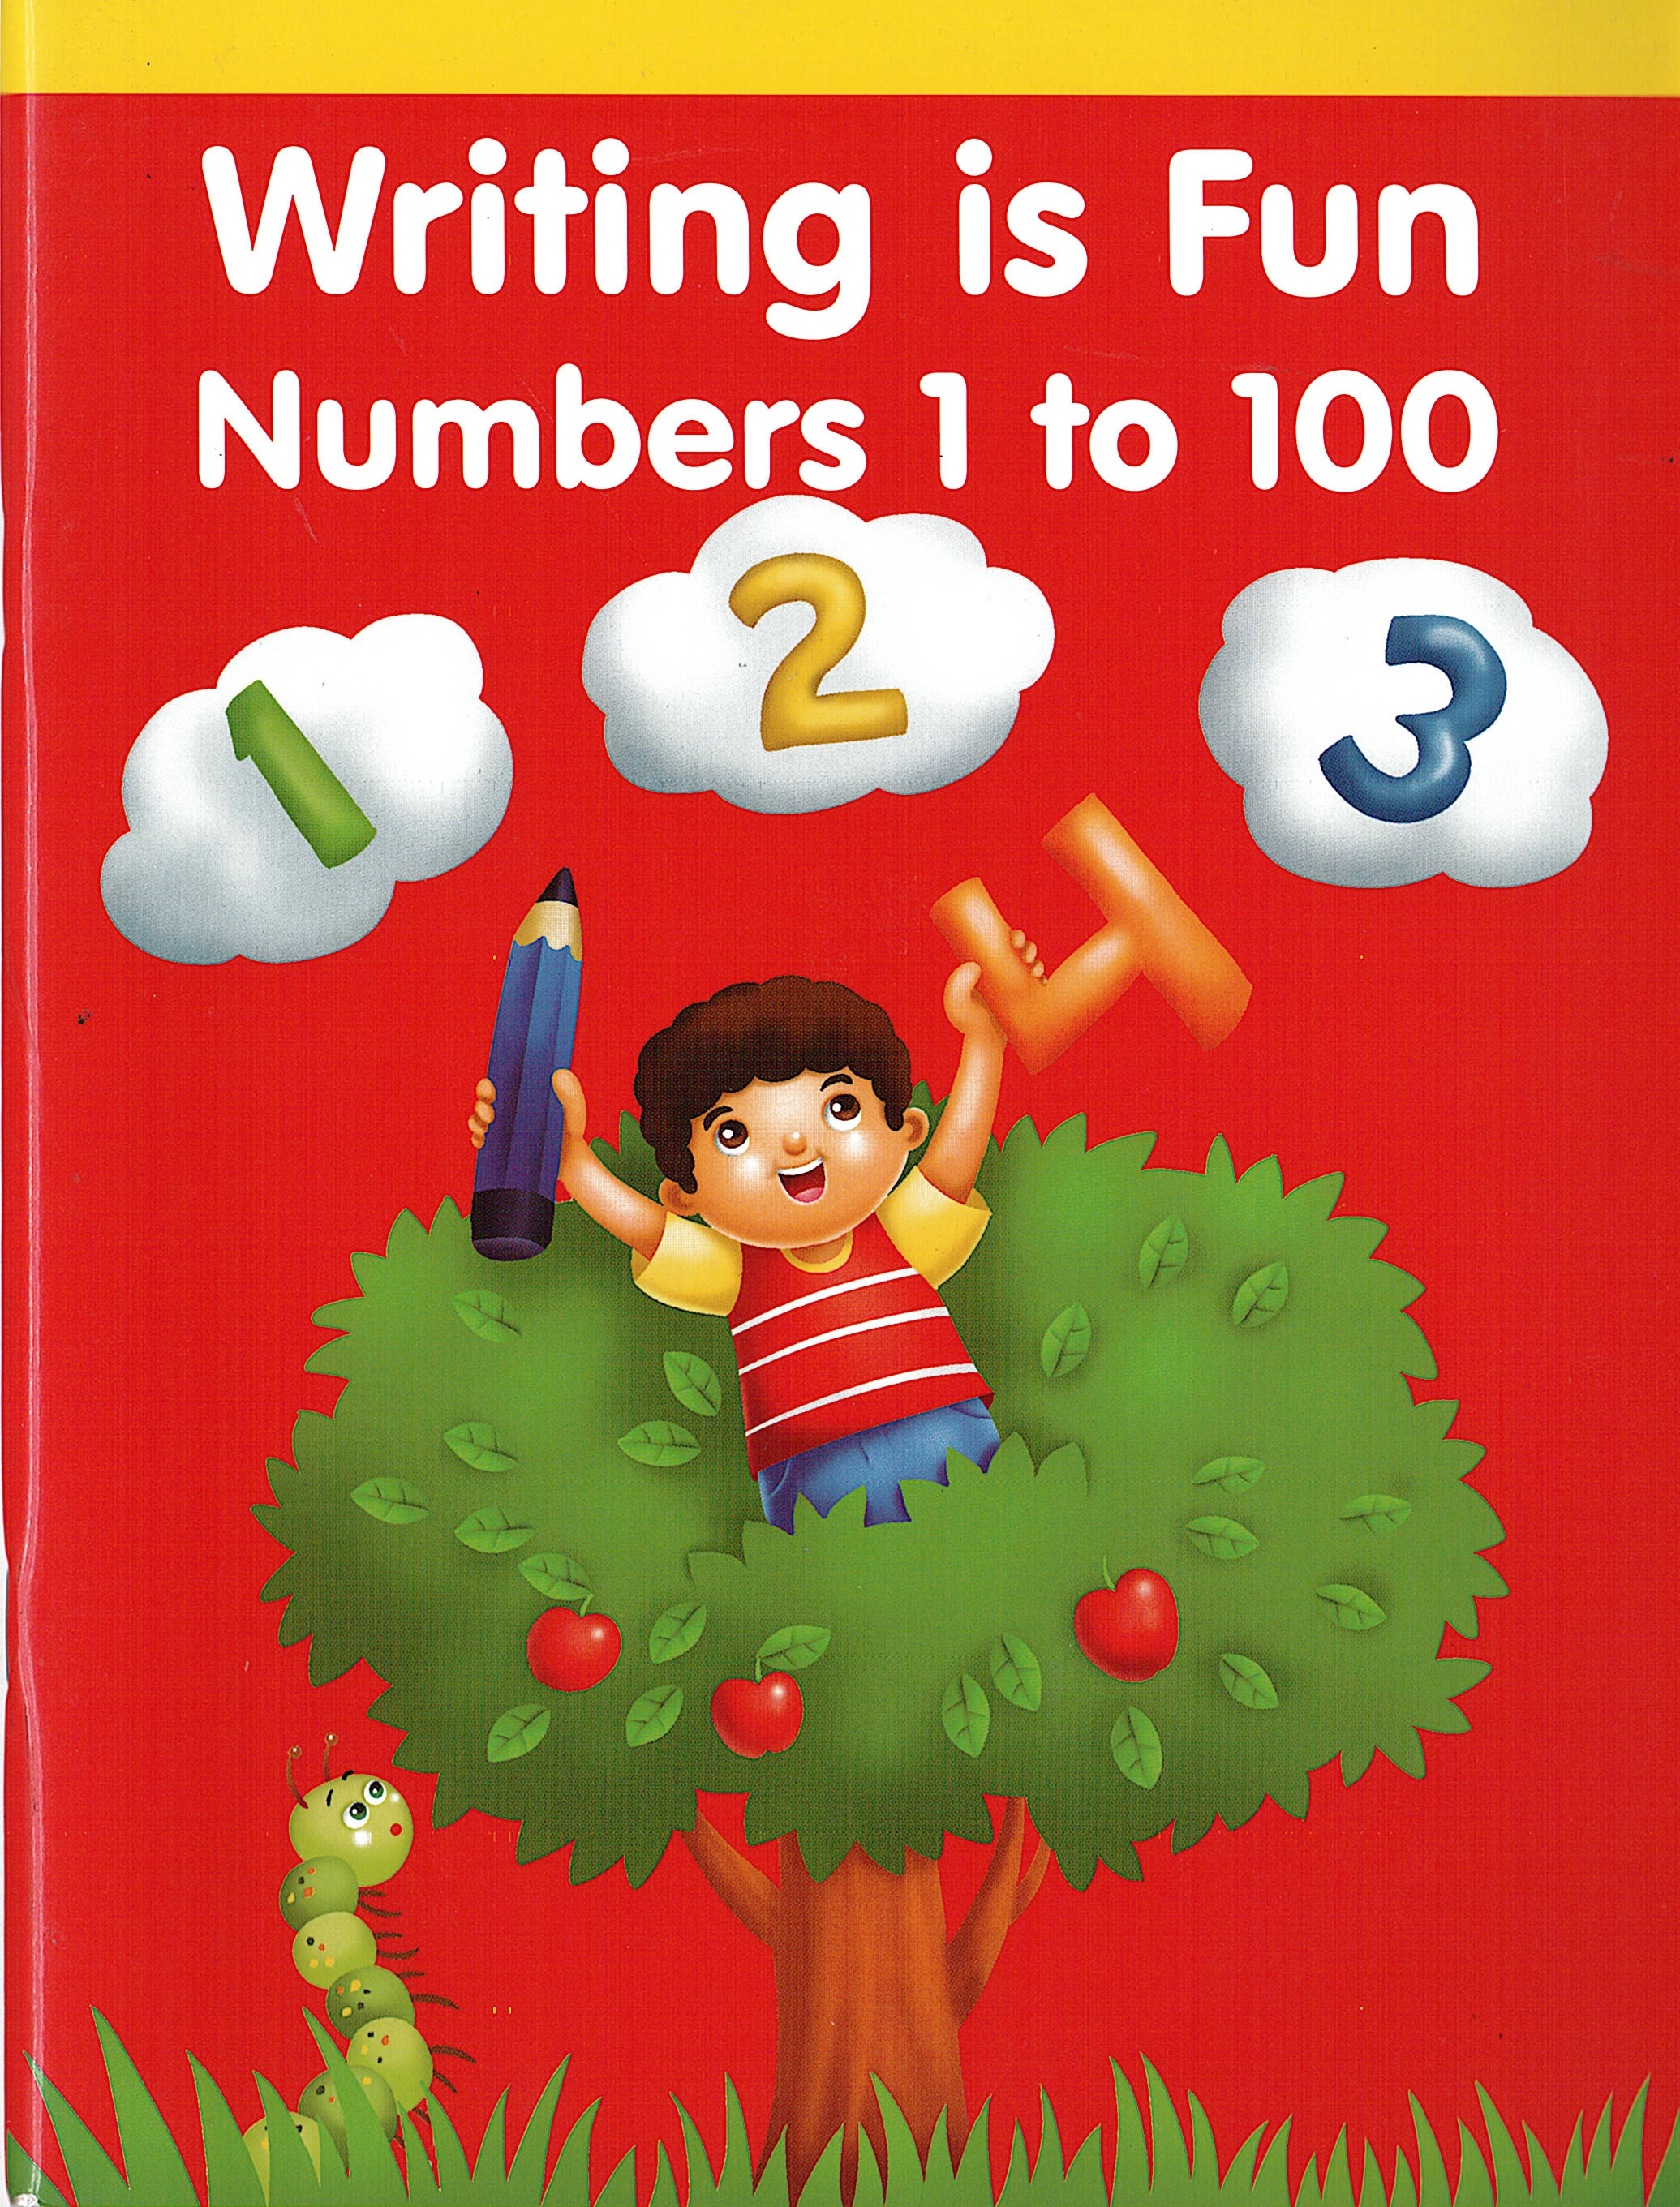 Writing is Fun Numbers 1 to 100